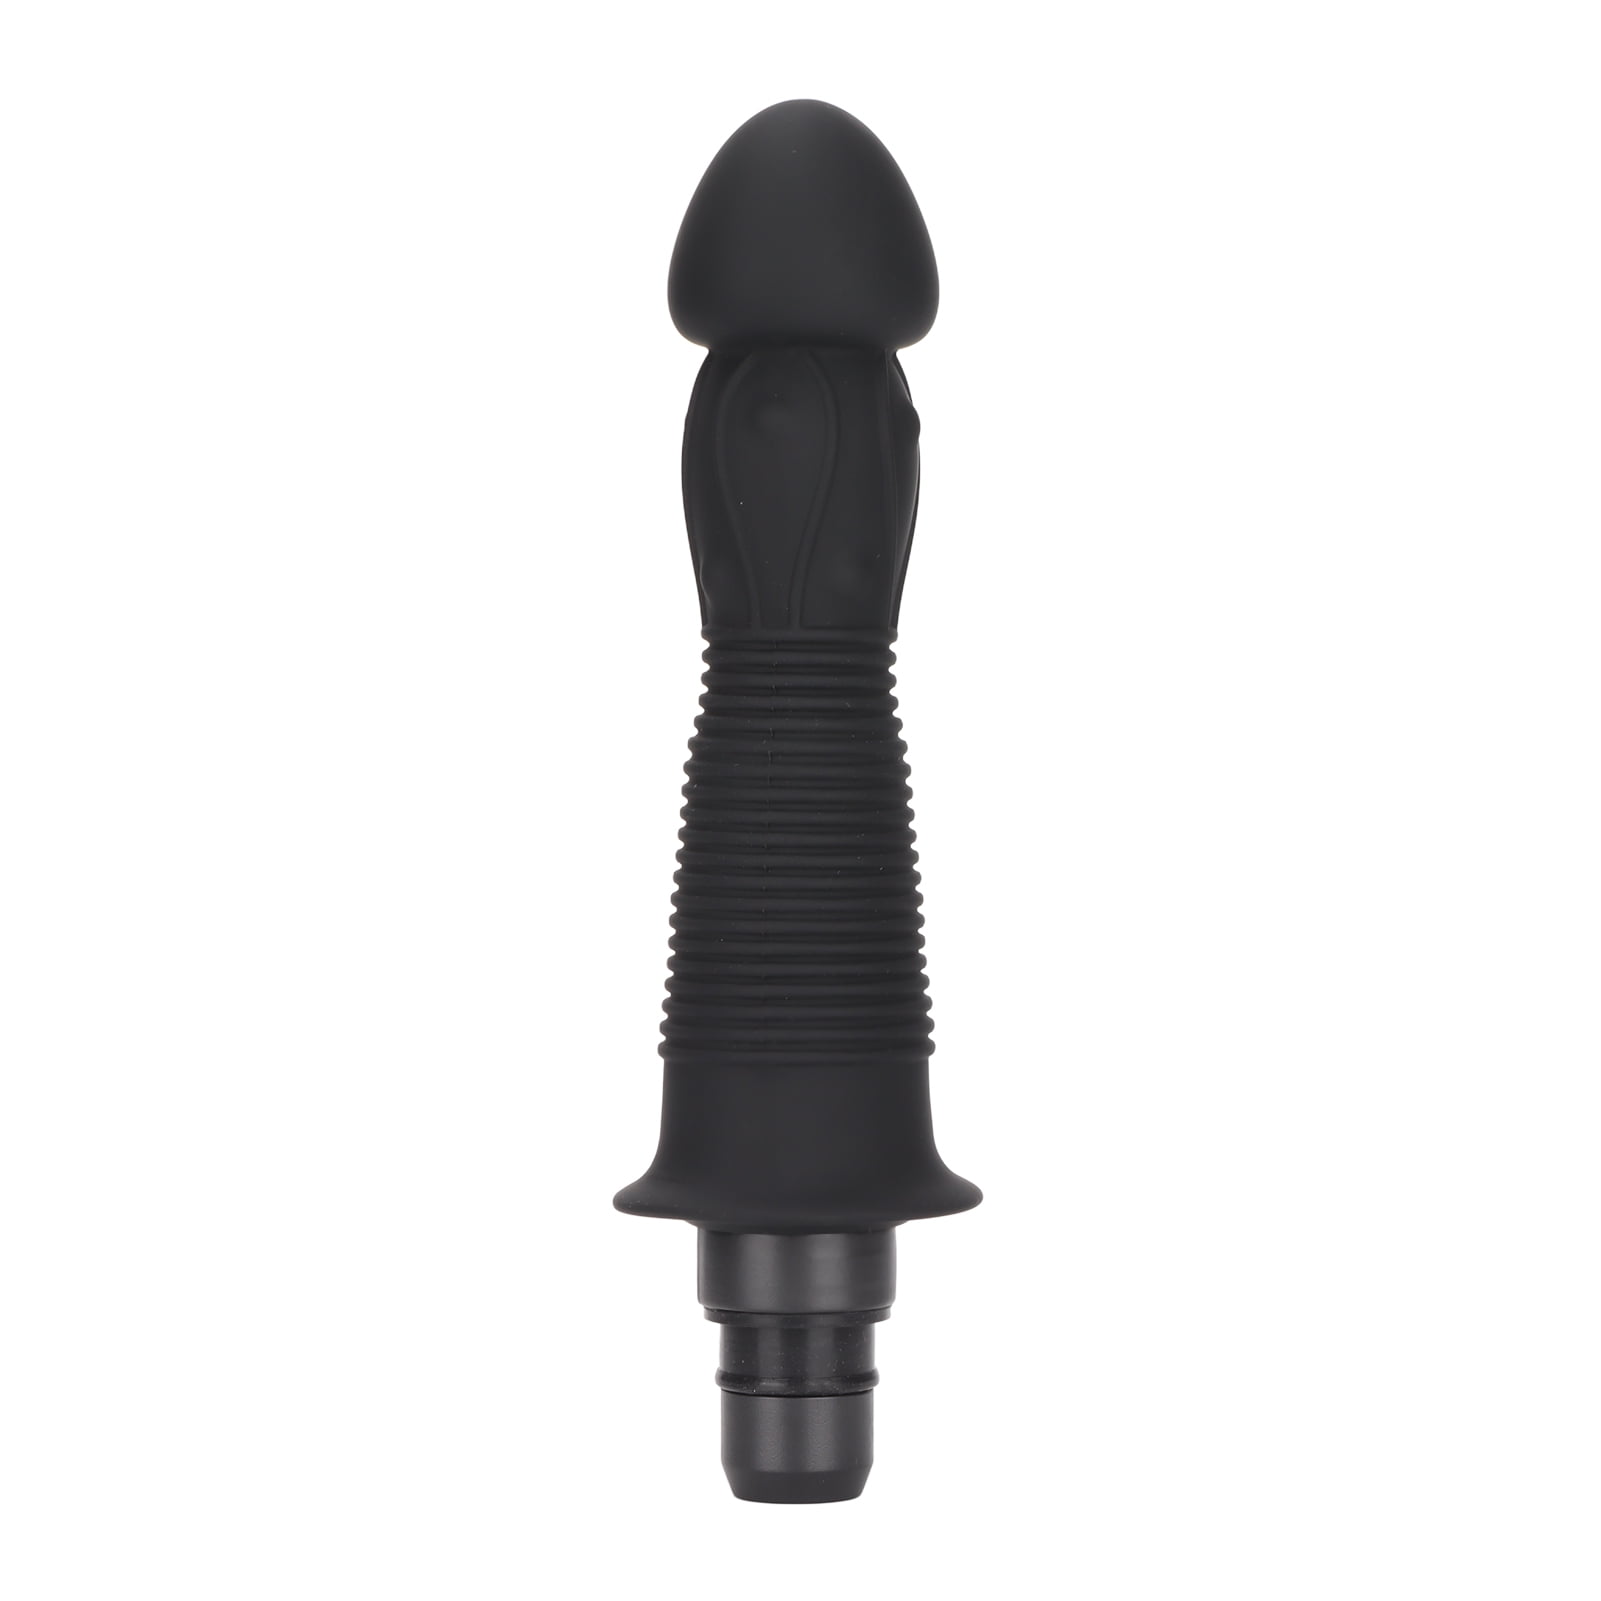 Deep-Tissue-Massager-Head-Soft-Silicone-Replaceable-Head-Attachment-for-Muscle-Massager-Black-0-7in_ce2a0bdc-e387-4c1b-8480-9d44acee22ff.2152d46703418ad95fccb0c45b66b5ba.jpeg